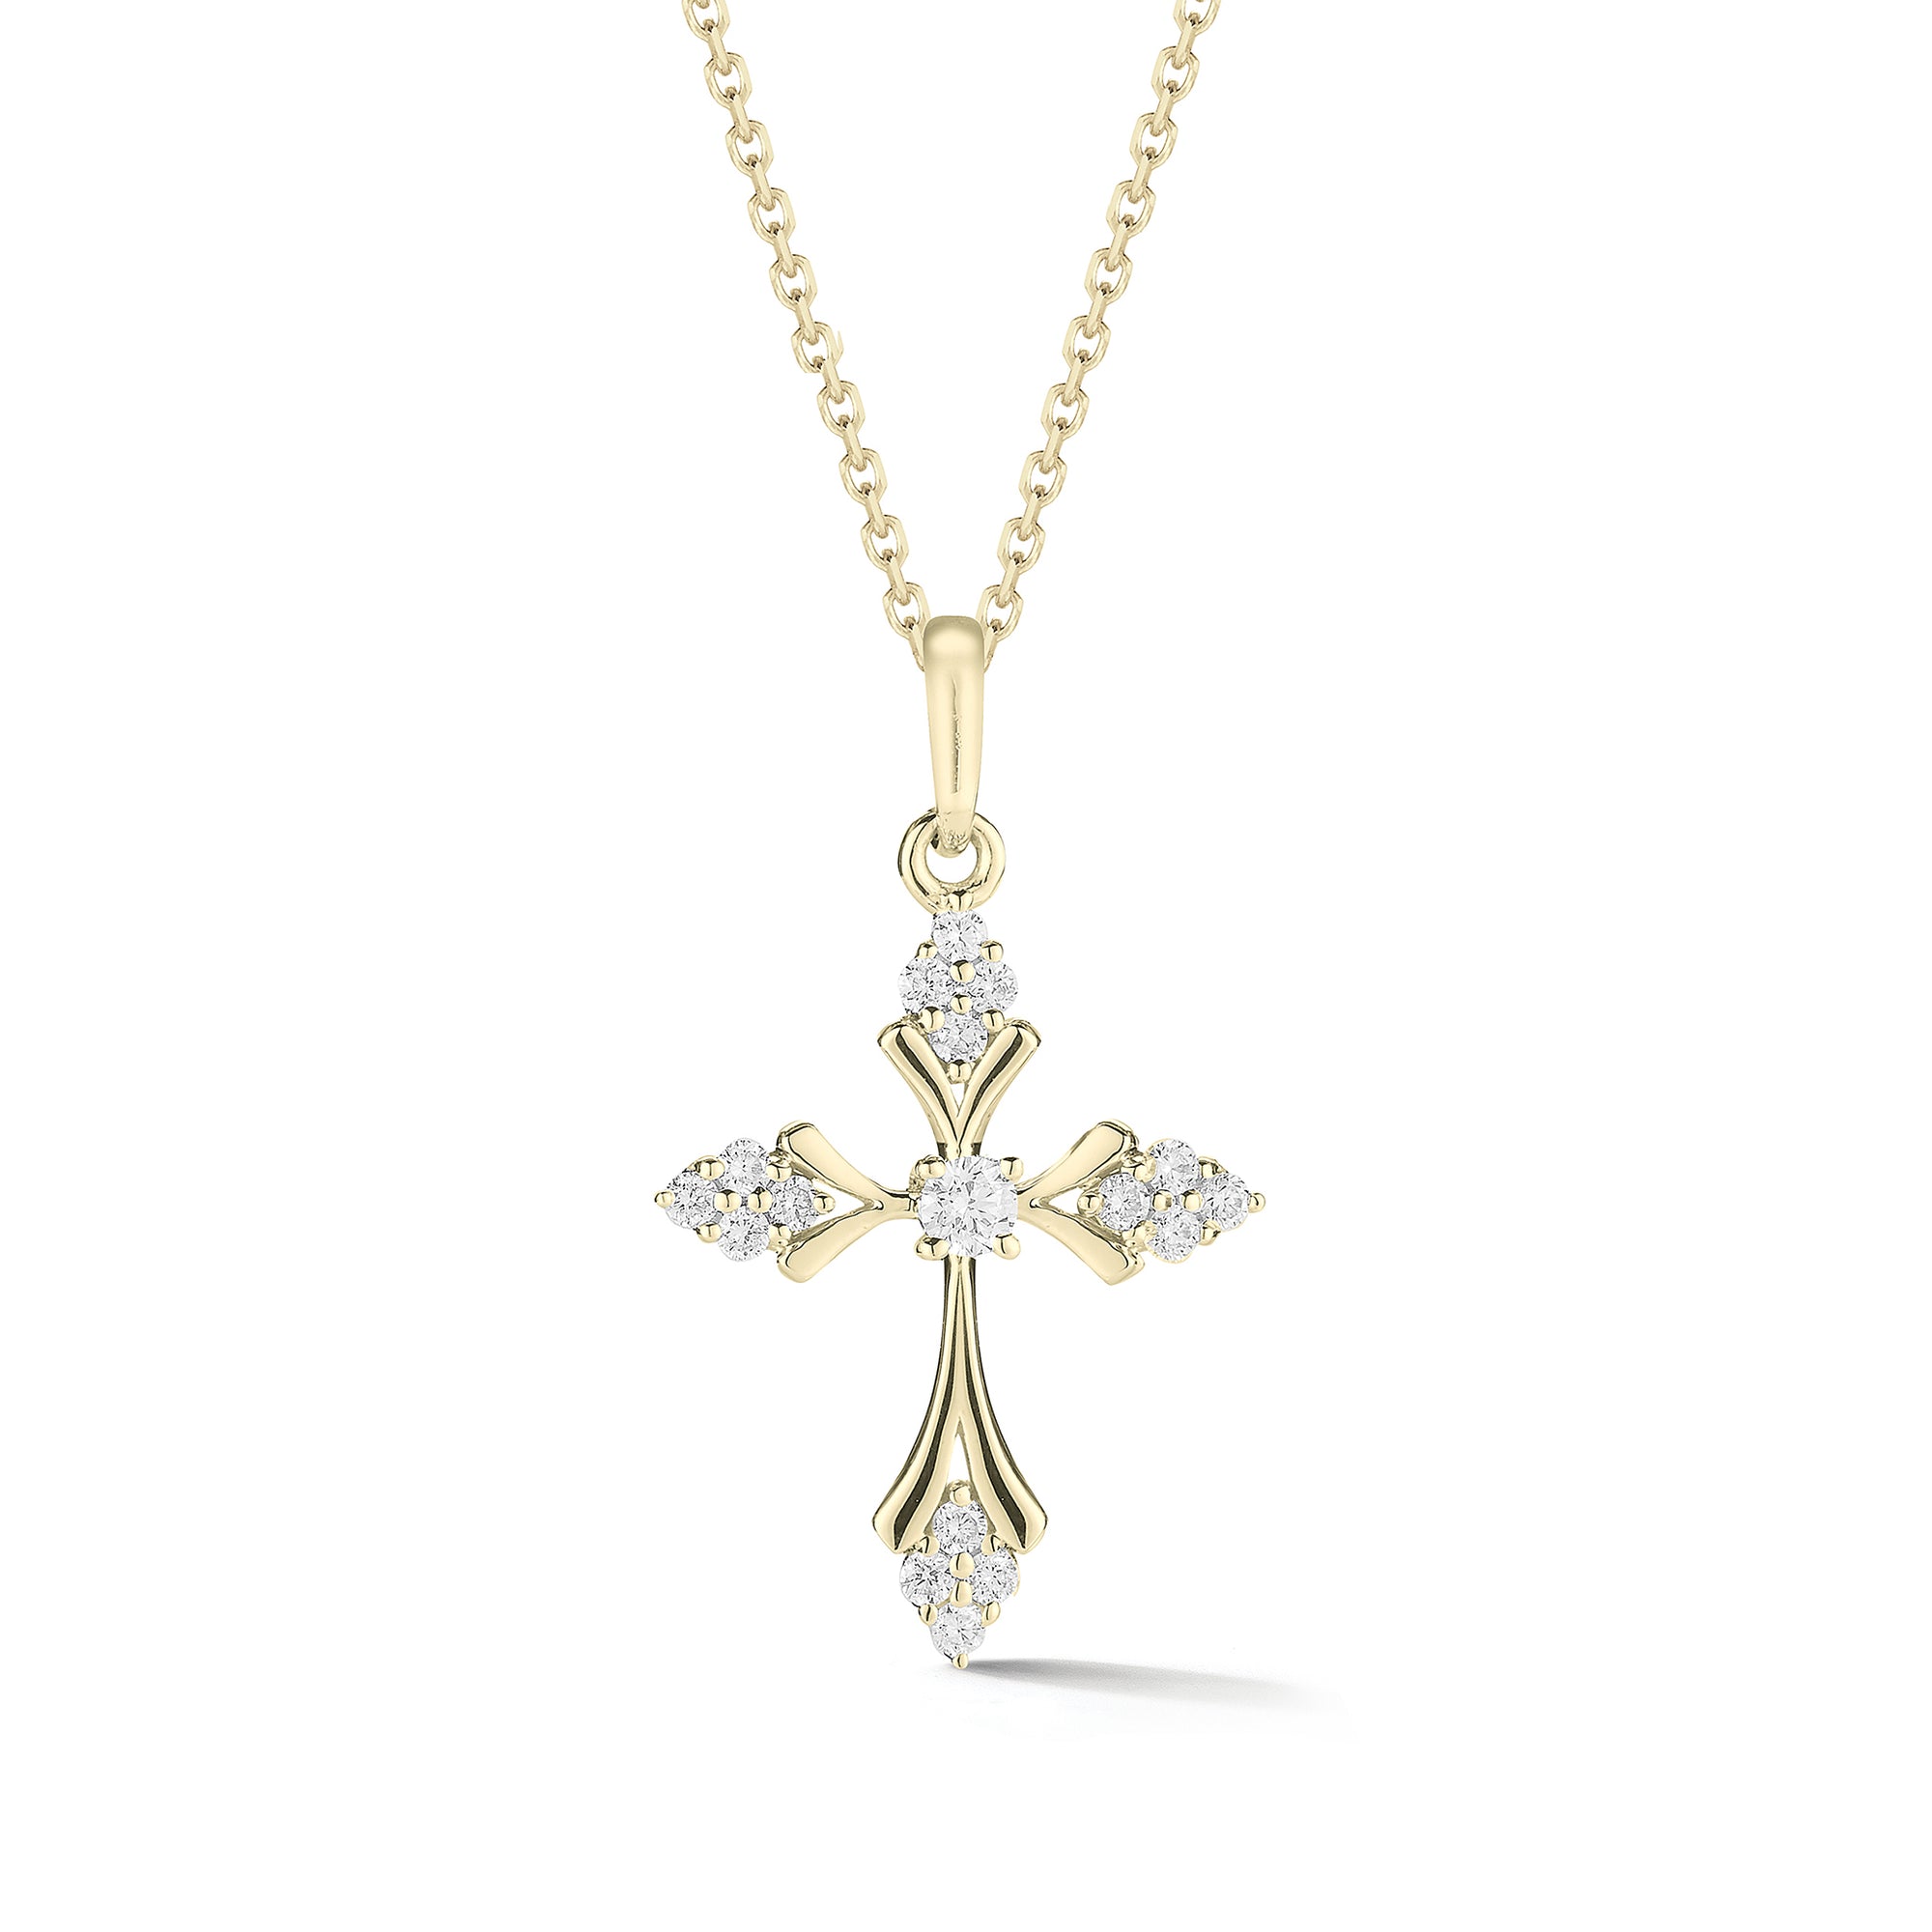 Diamond Cluster Cross Pendant Necklace  -14K gold weighing 2.15 grams  -17 round prong-set diamonds totaling 0.15 carats.